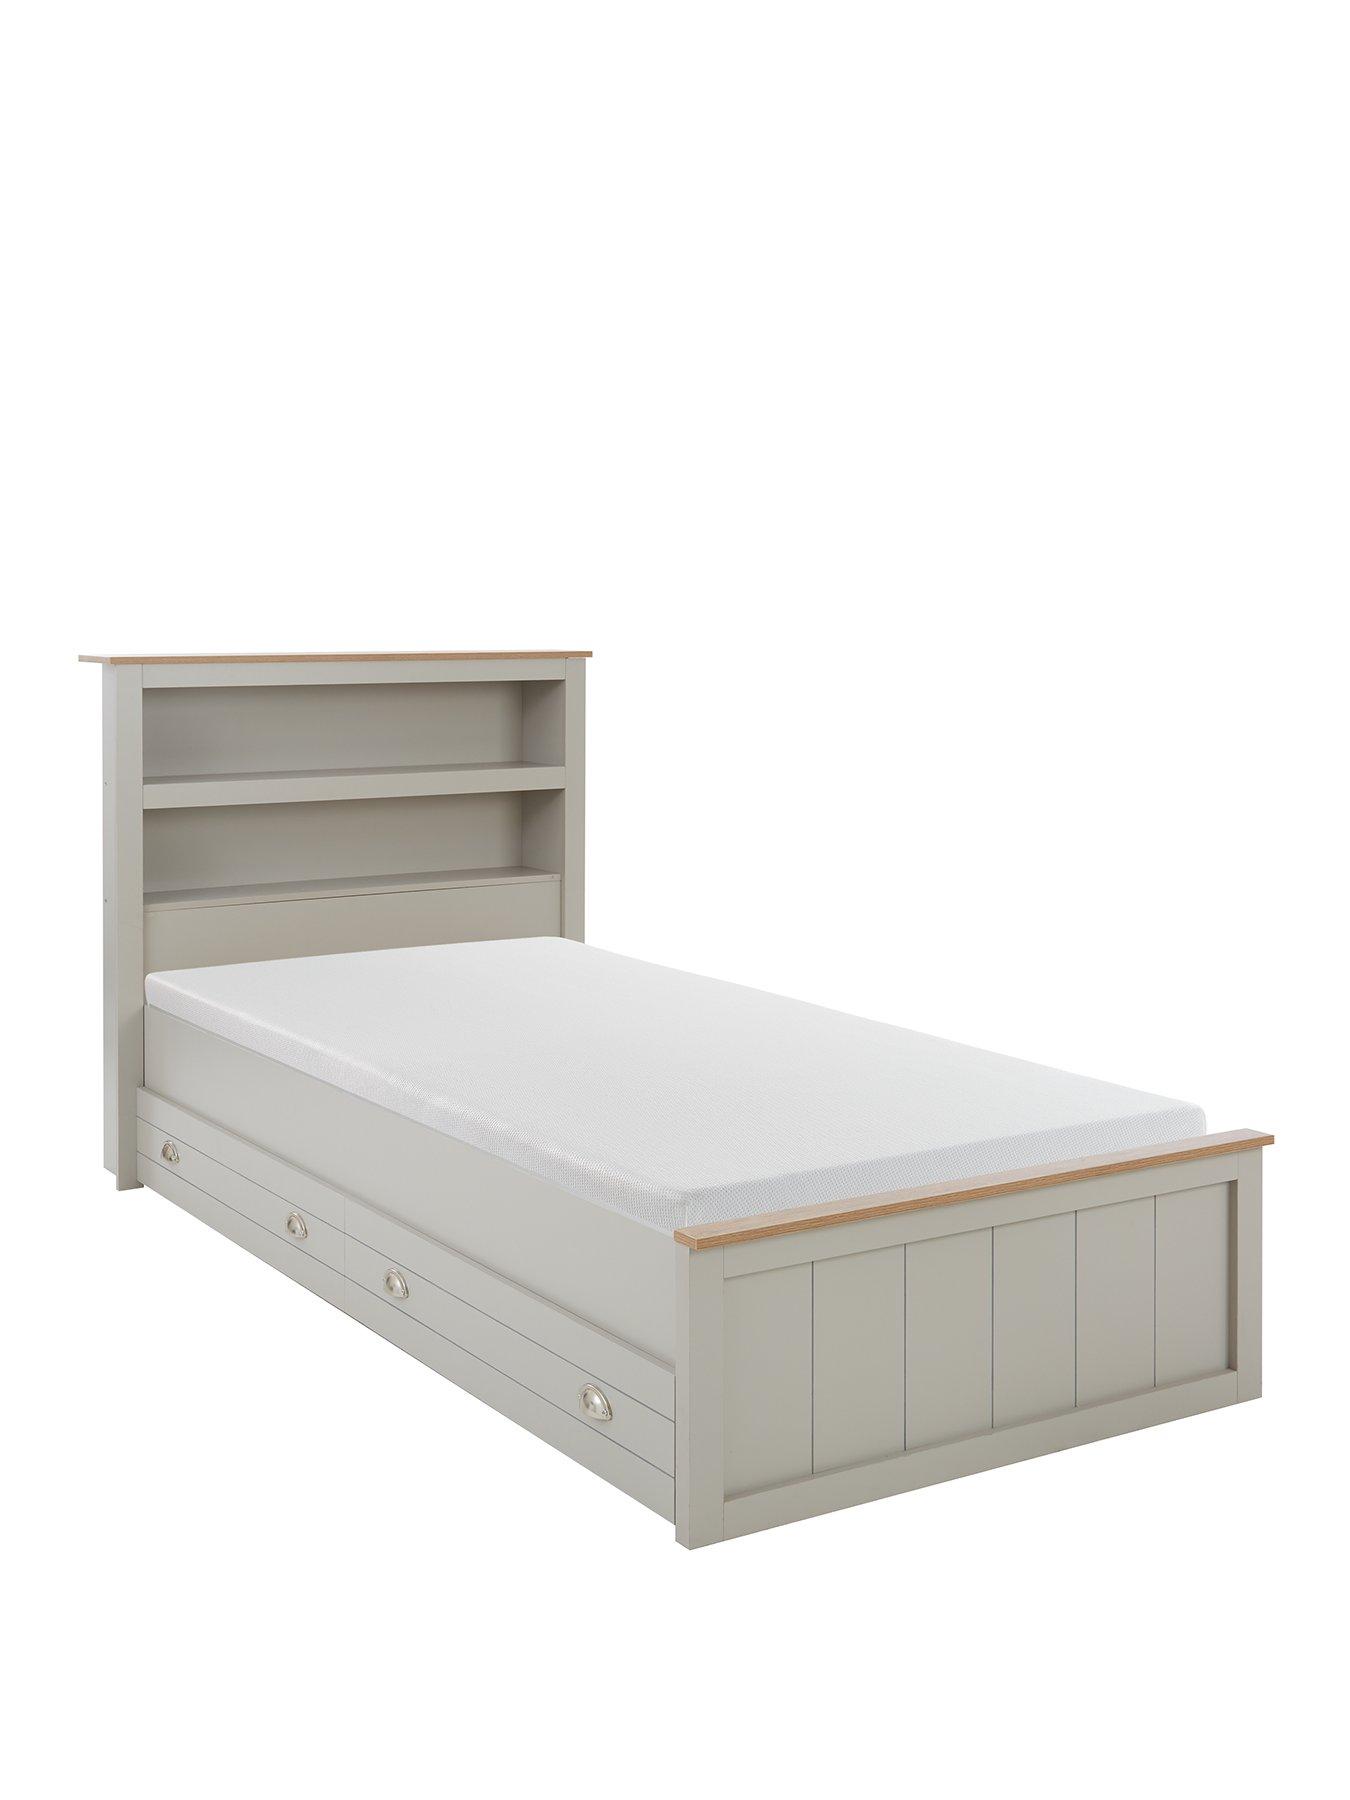 Very Home Atlanta Kids Single 2 Drawer Bed With Mattress Options (Buy And Save!) - Grey/Oak - Bed Frame Only